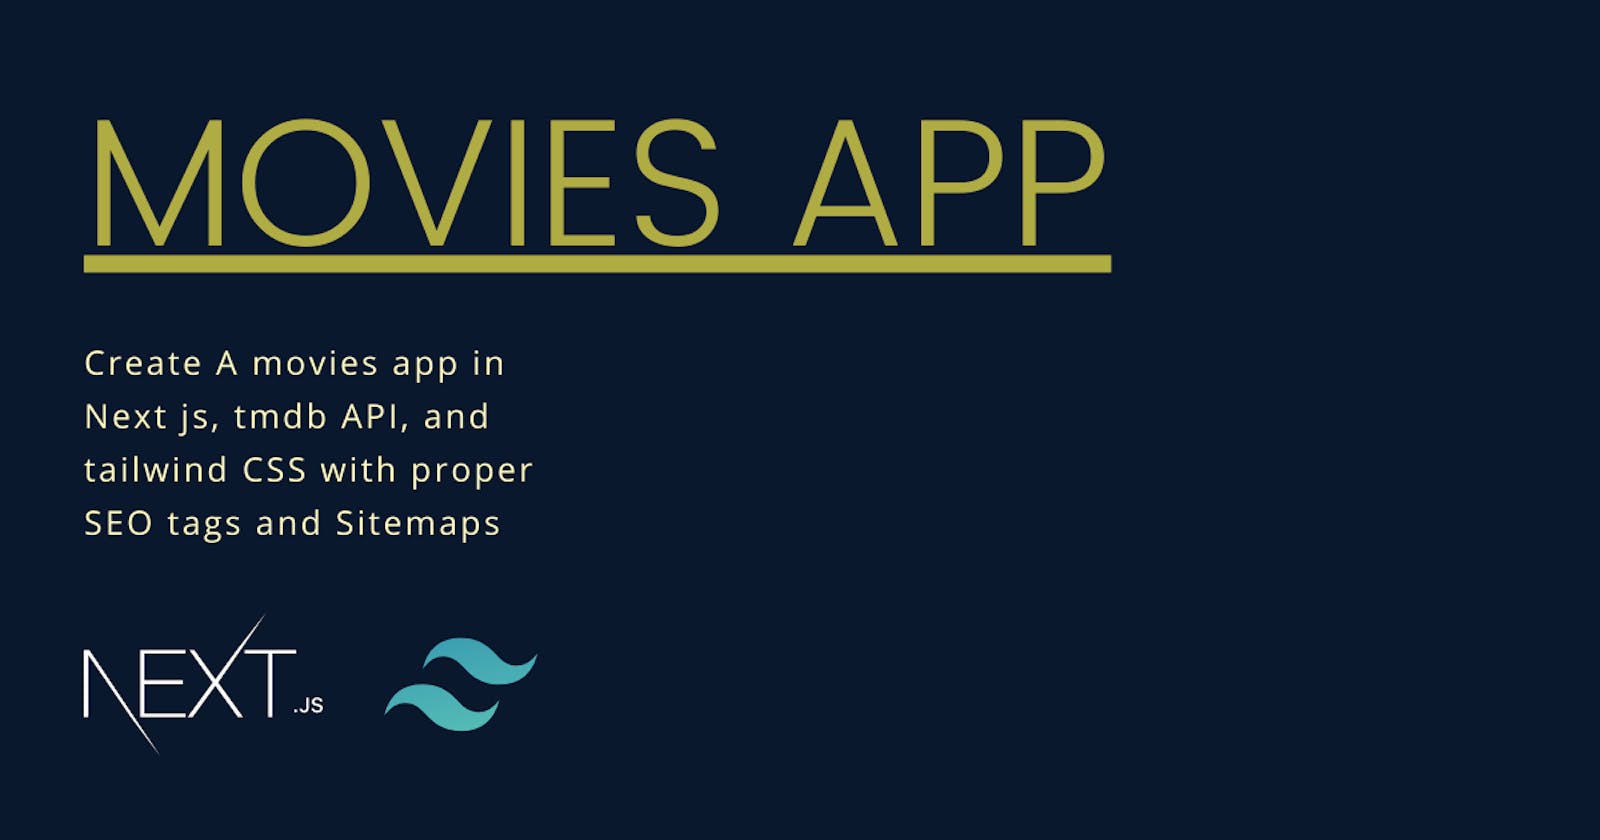 Let's Create a Movies app in Next Js using Tmdb API and Tailwind CSS